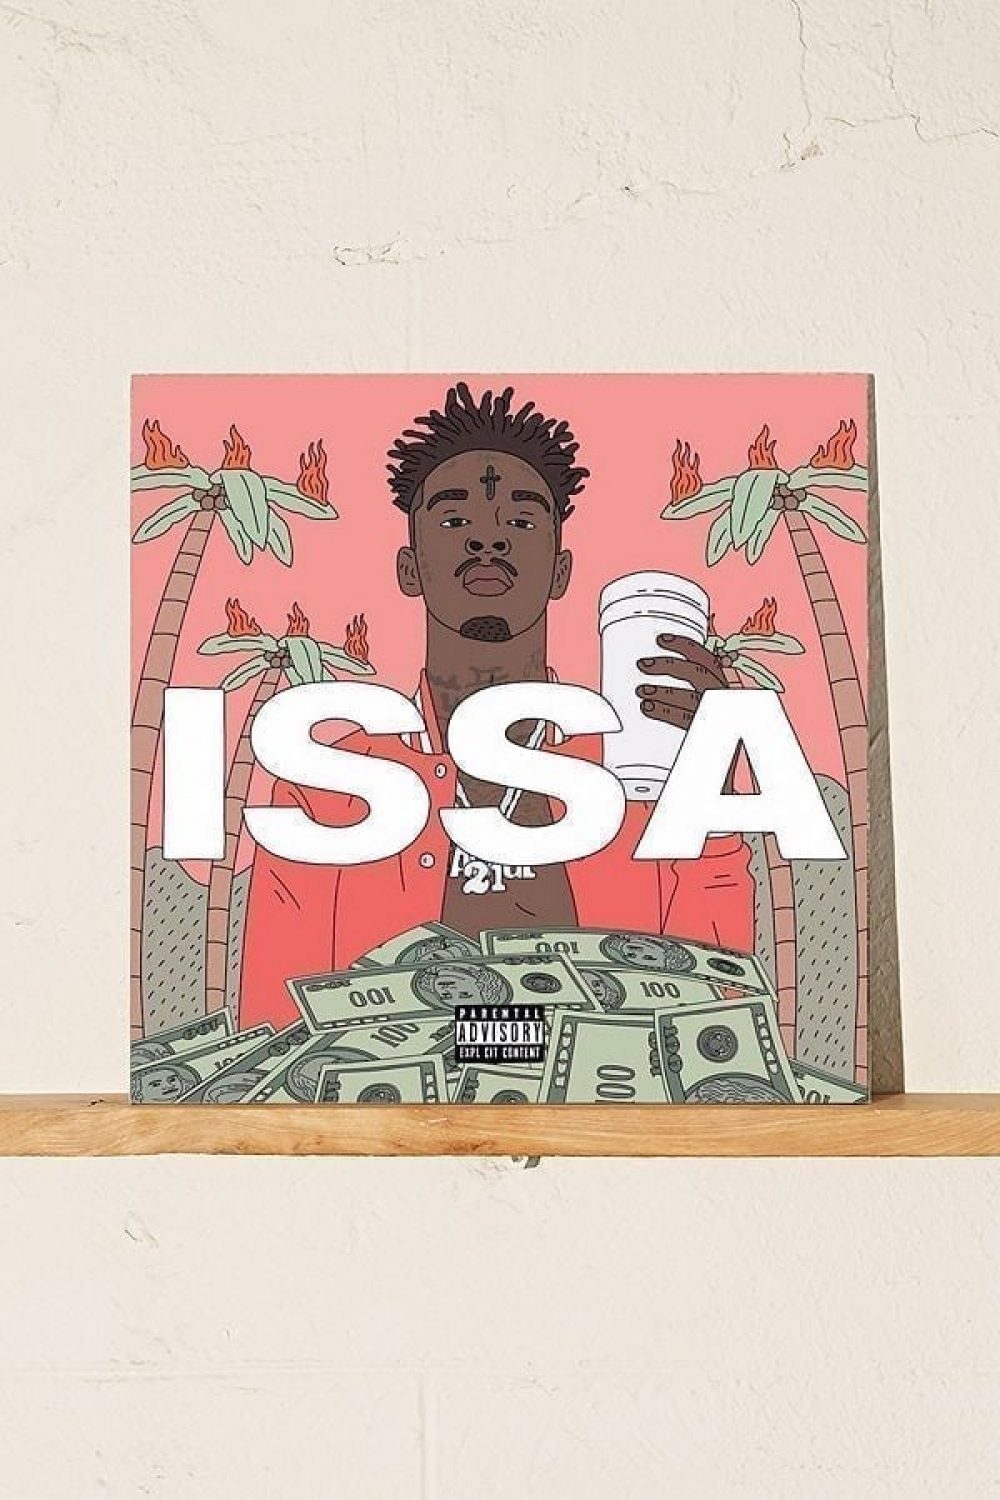 21 Savage's 'Issa Album' Is Certified Gold